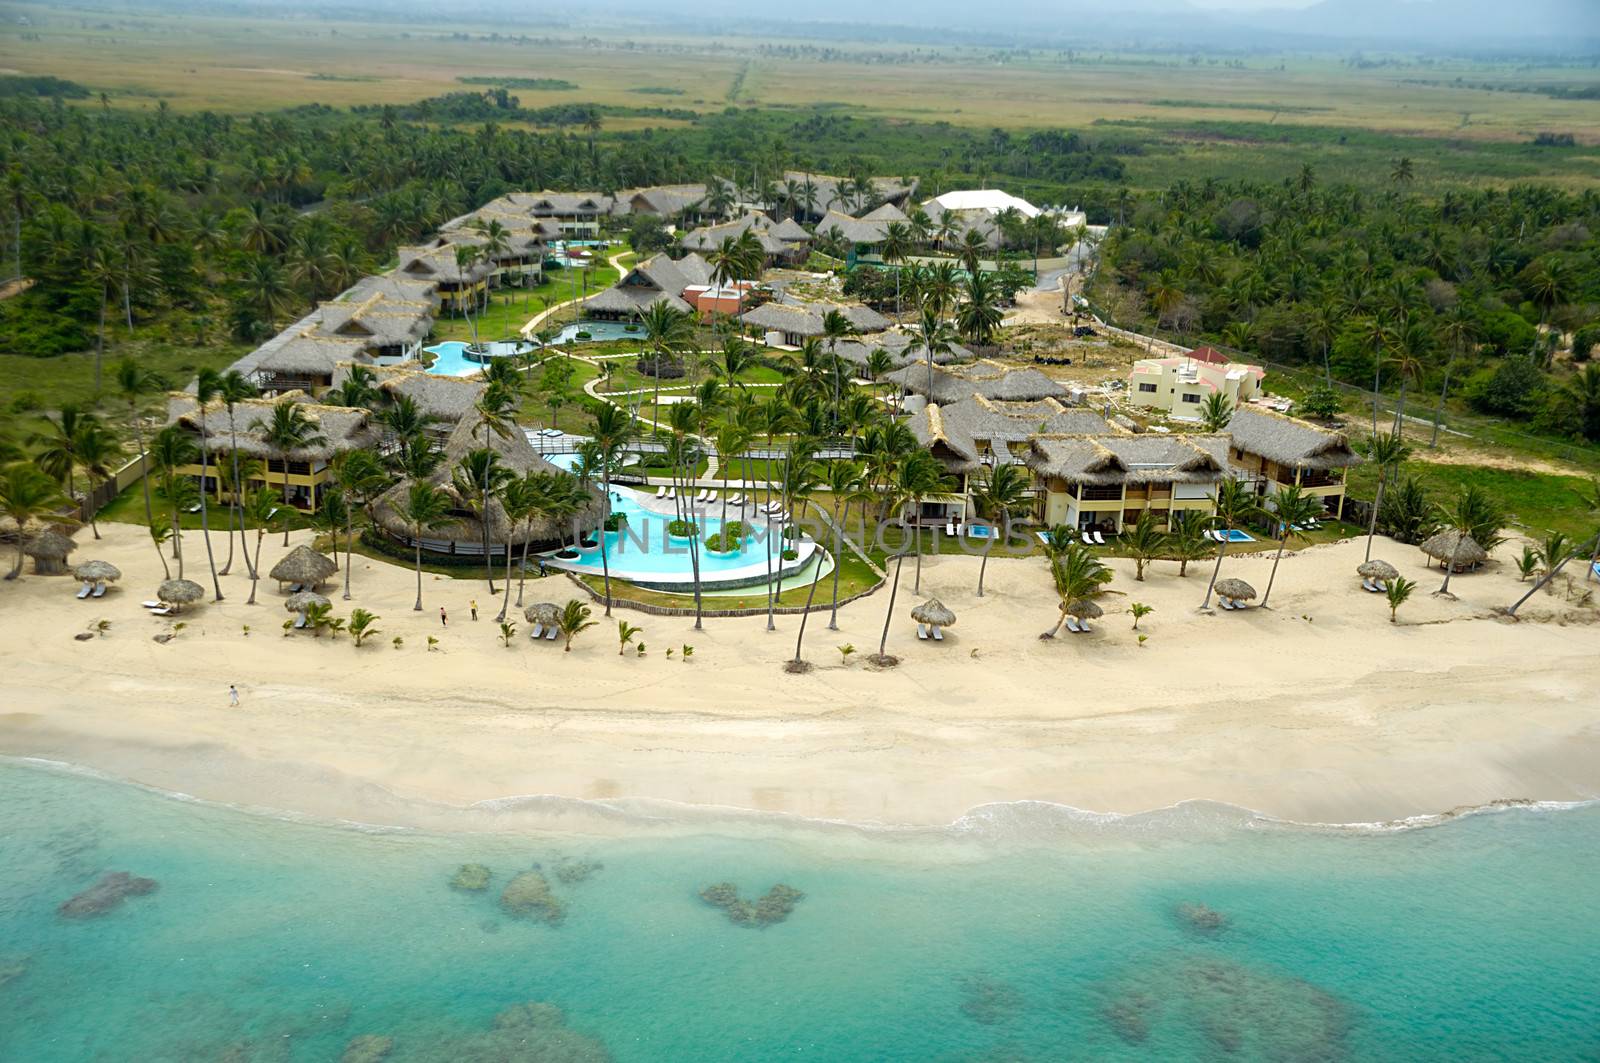 Hotel resort near exotic beach with palms. The Dominican Republic.